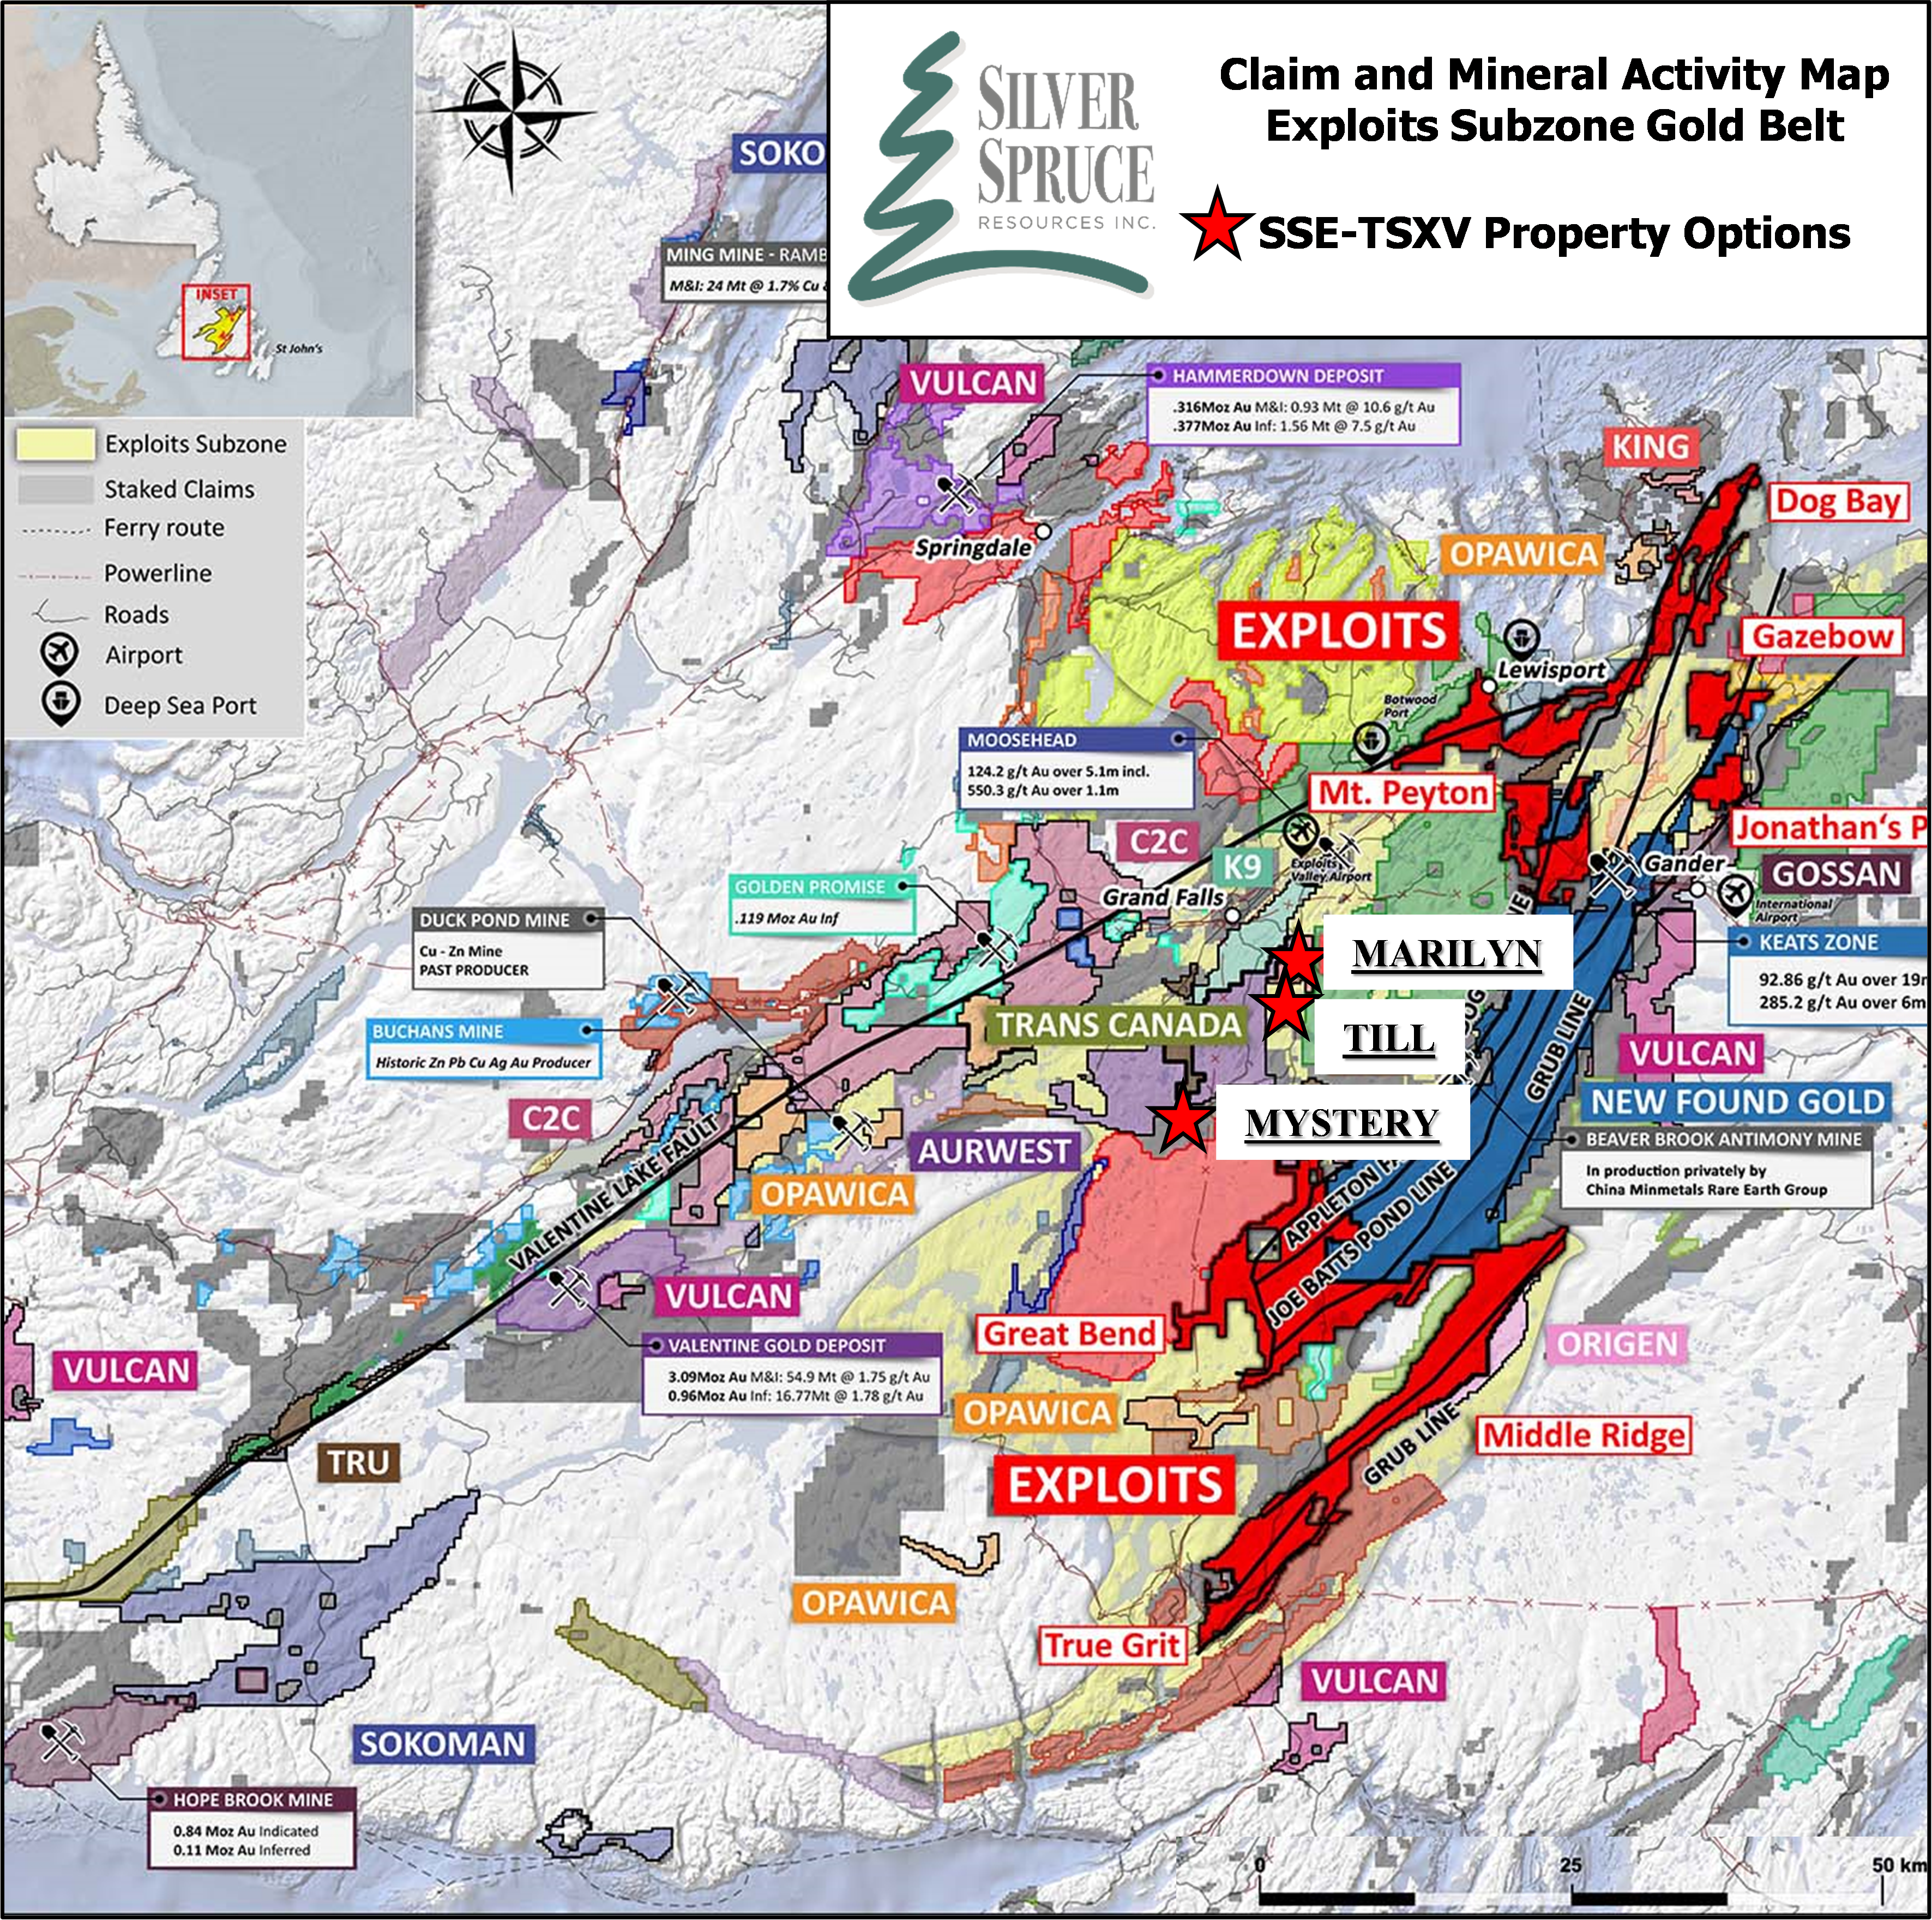 Silver Spruce Resources Inc., Tuesday, August 17, 2021, Press release picture